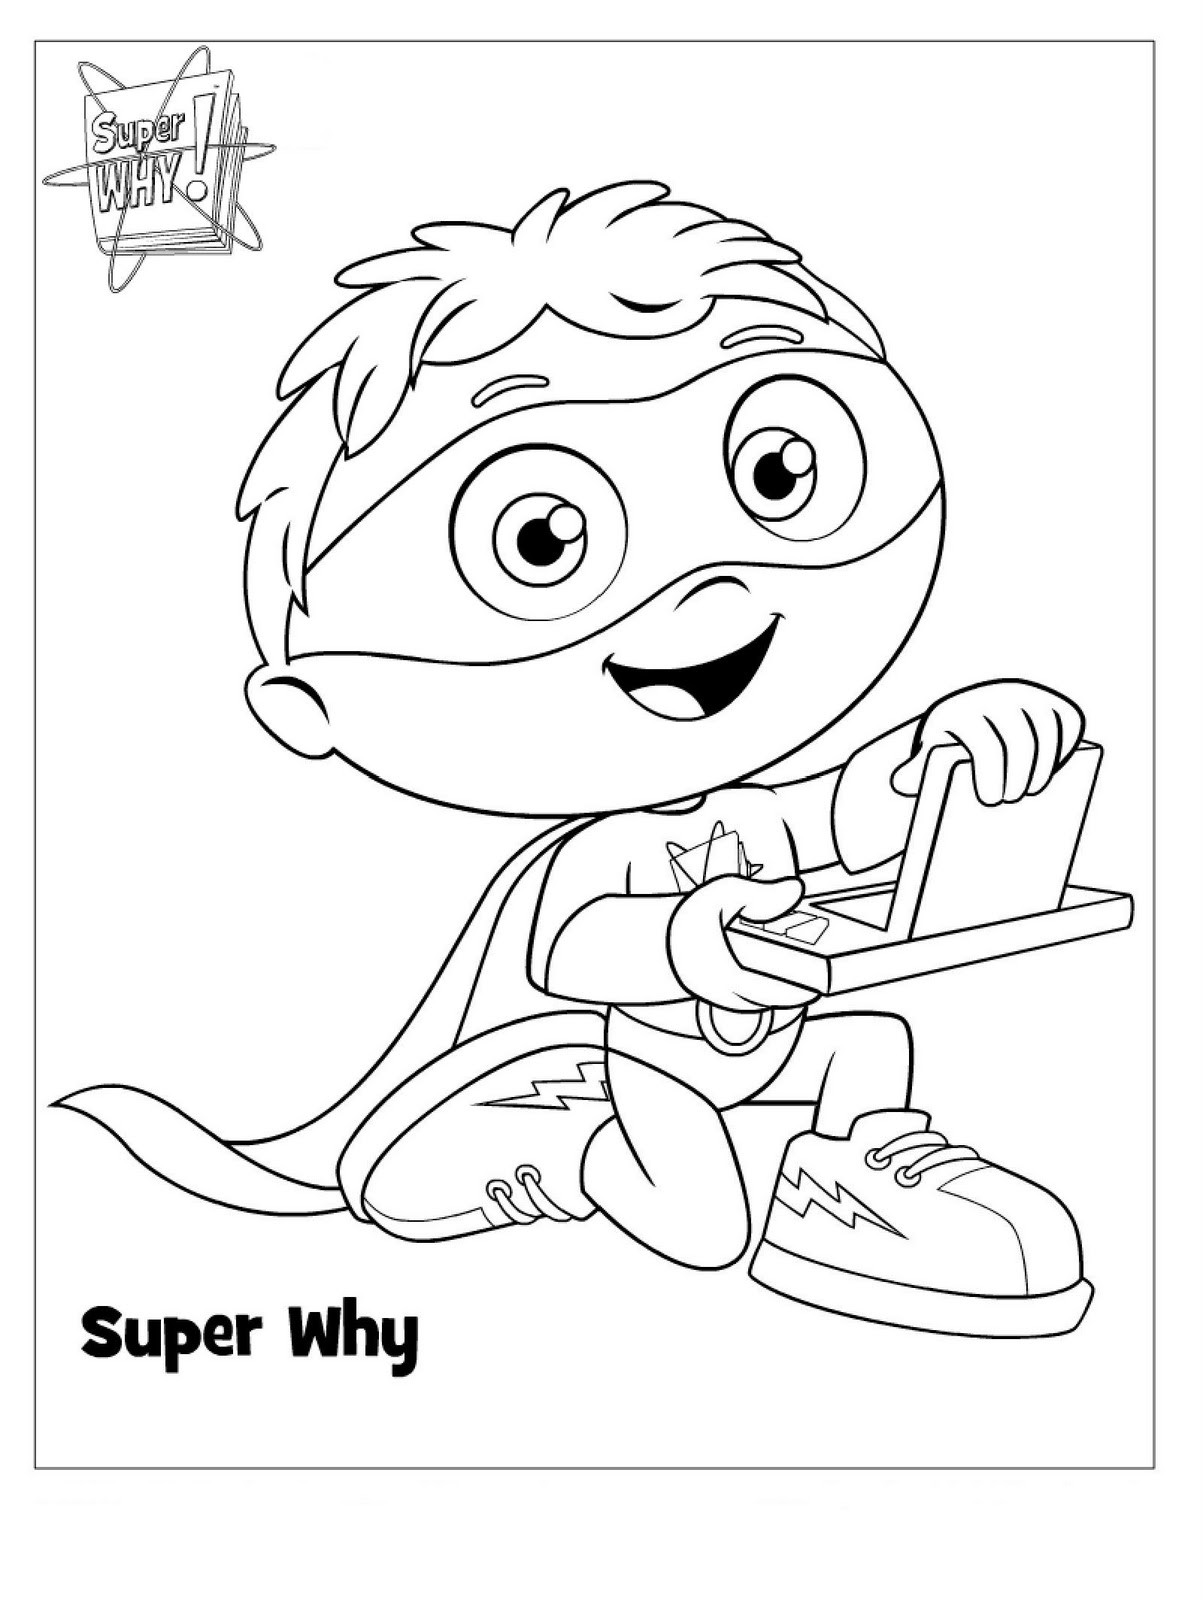 Printable Toddler Coloring Pages
 Super Why Coloring Pages Best Coloring Pages For Kids